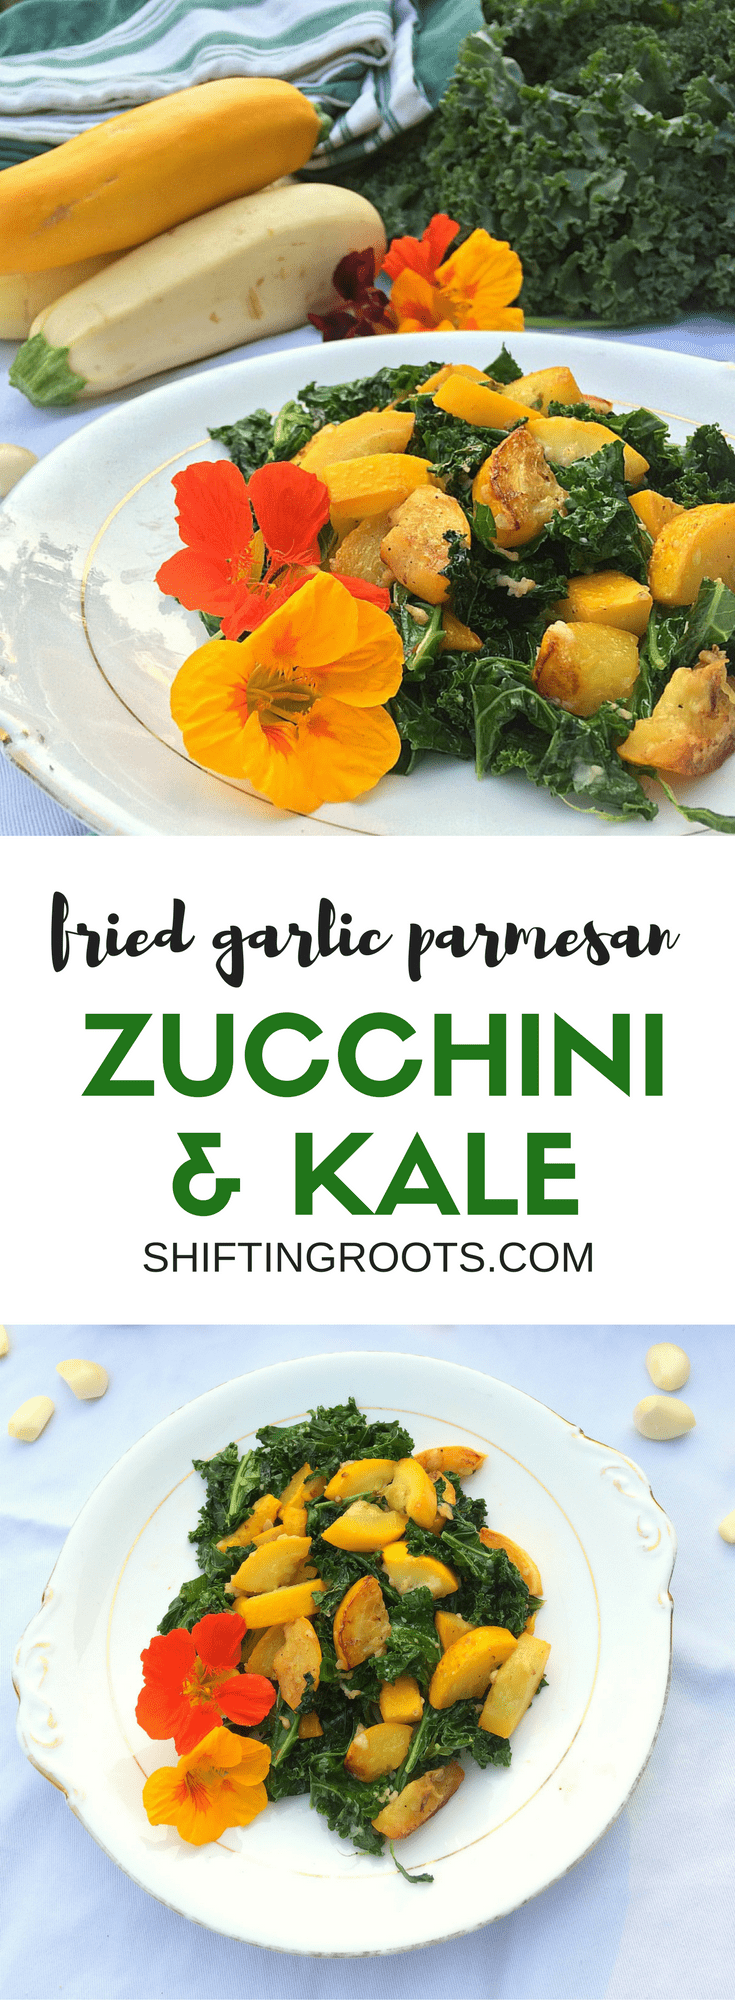 An easy summer side dish recipe to use up your garden produce. Tender zucchini and crisp kale shine when fried and paired with garlic and parmesan. So good even your zucchini-hating friends will like it. Sub in summer squash for a tasty alternative!